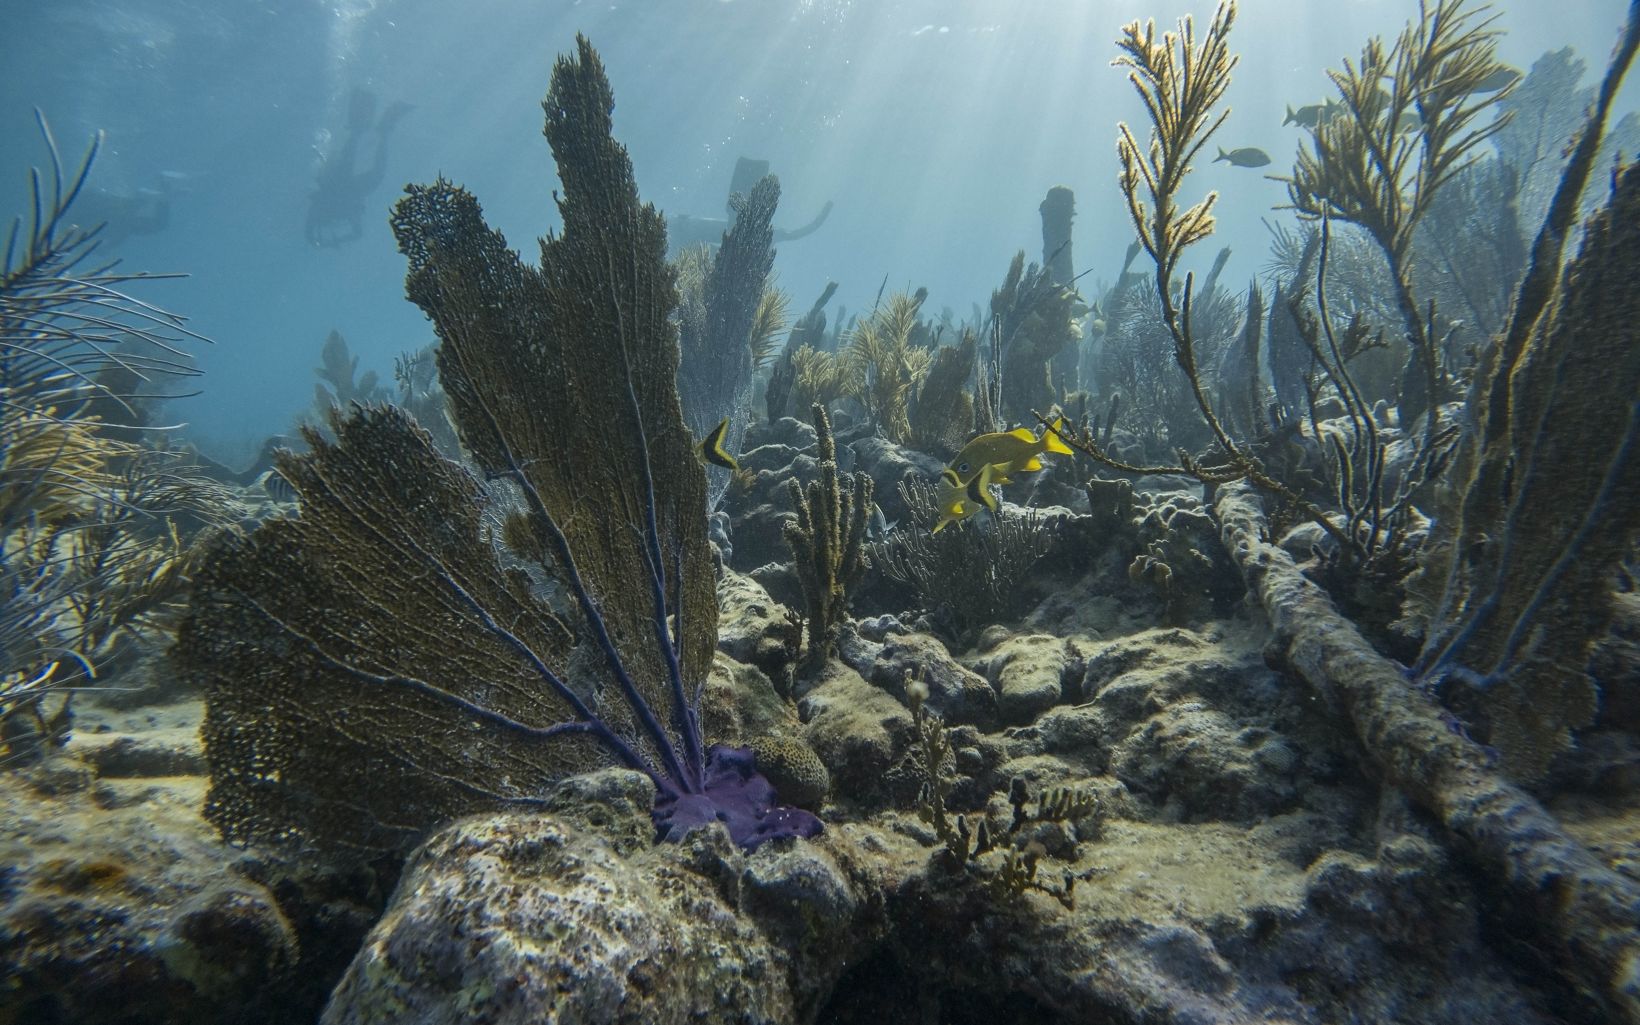 A fan coral in the foreground surrounded by hard corals underwater.